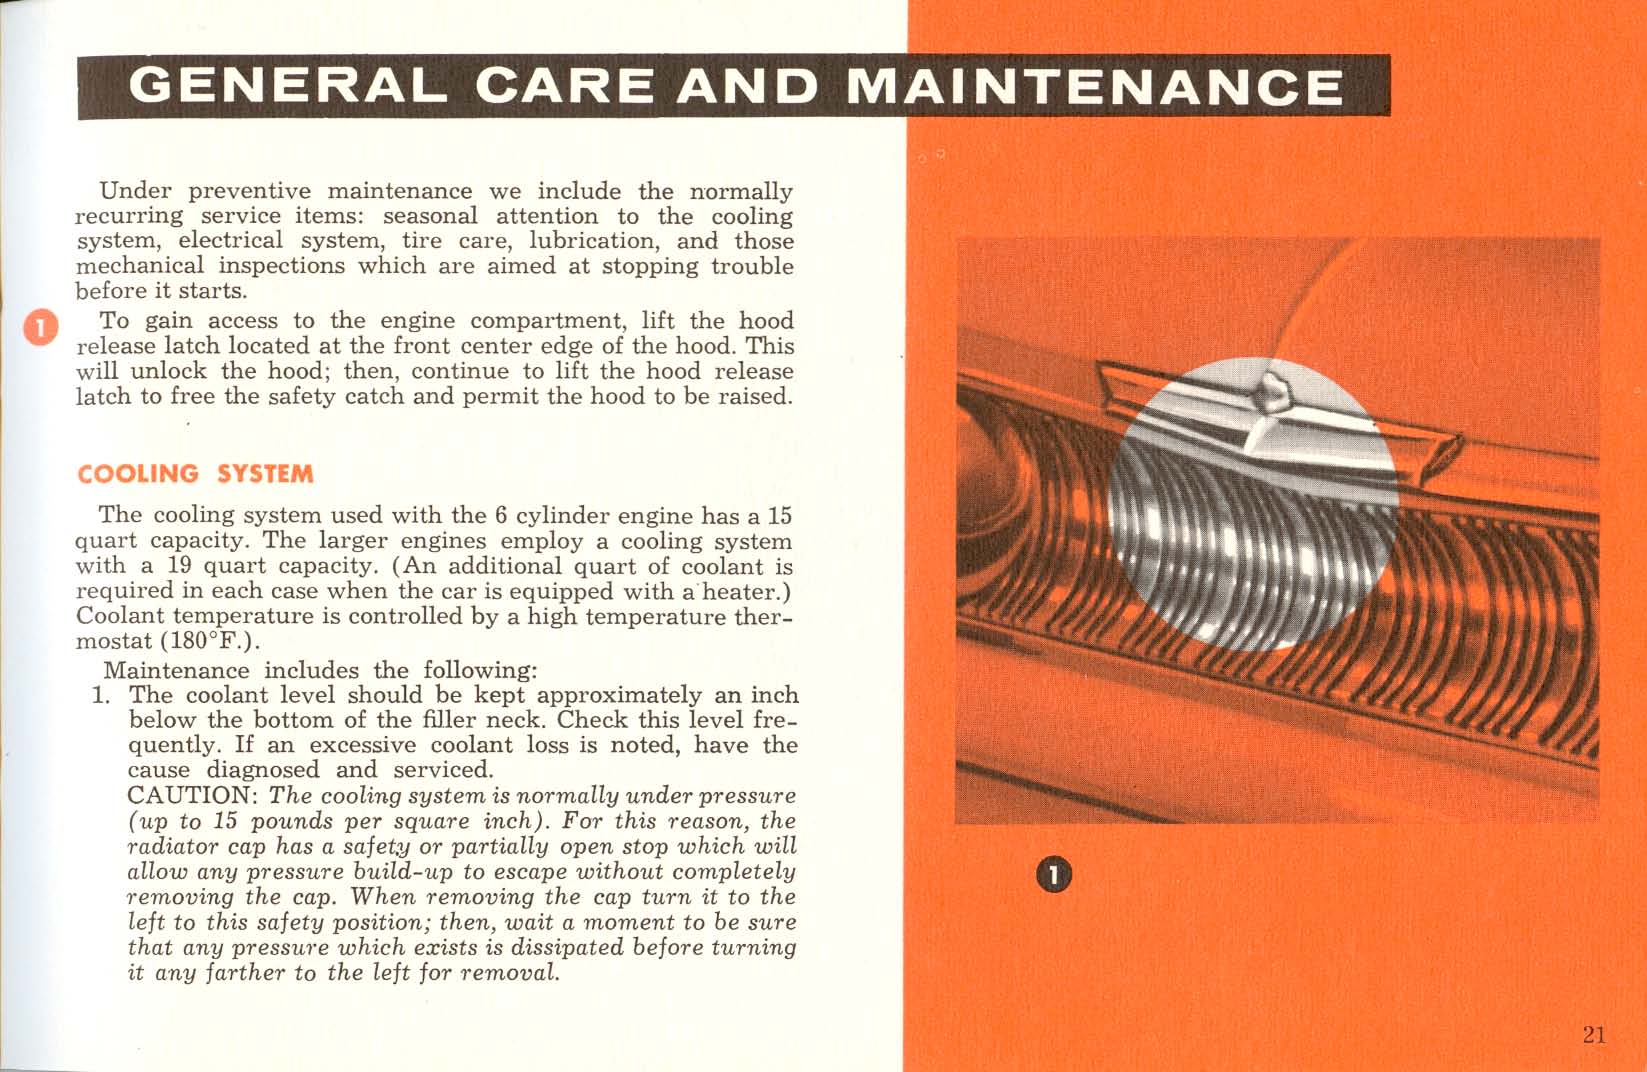 1961 Mercury Owners Manual Page 5